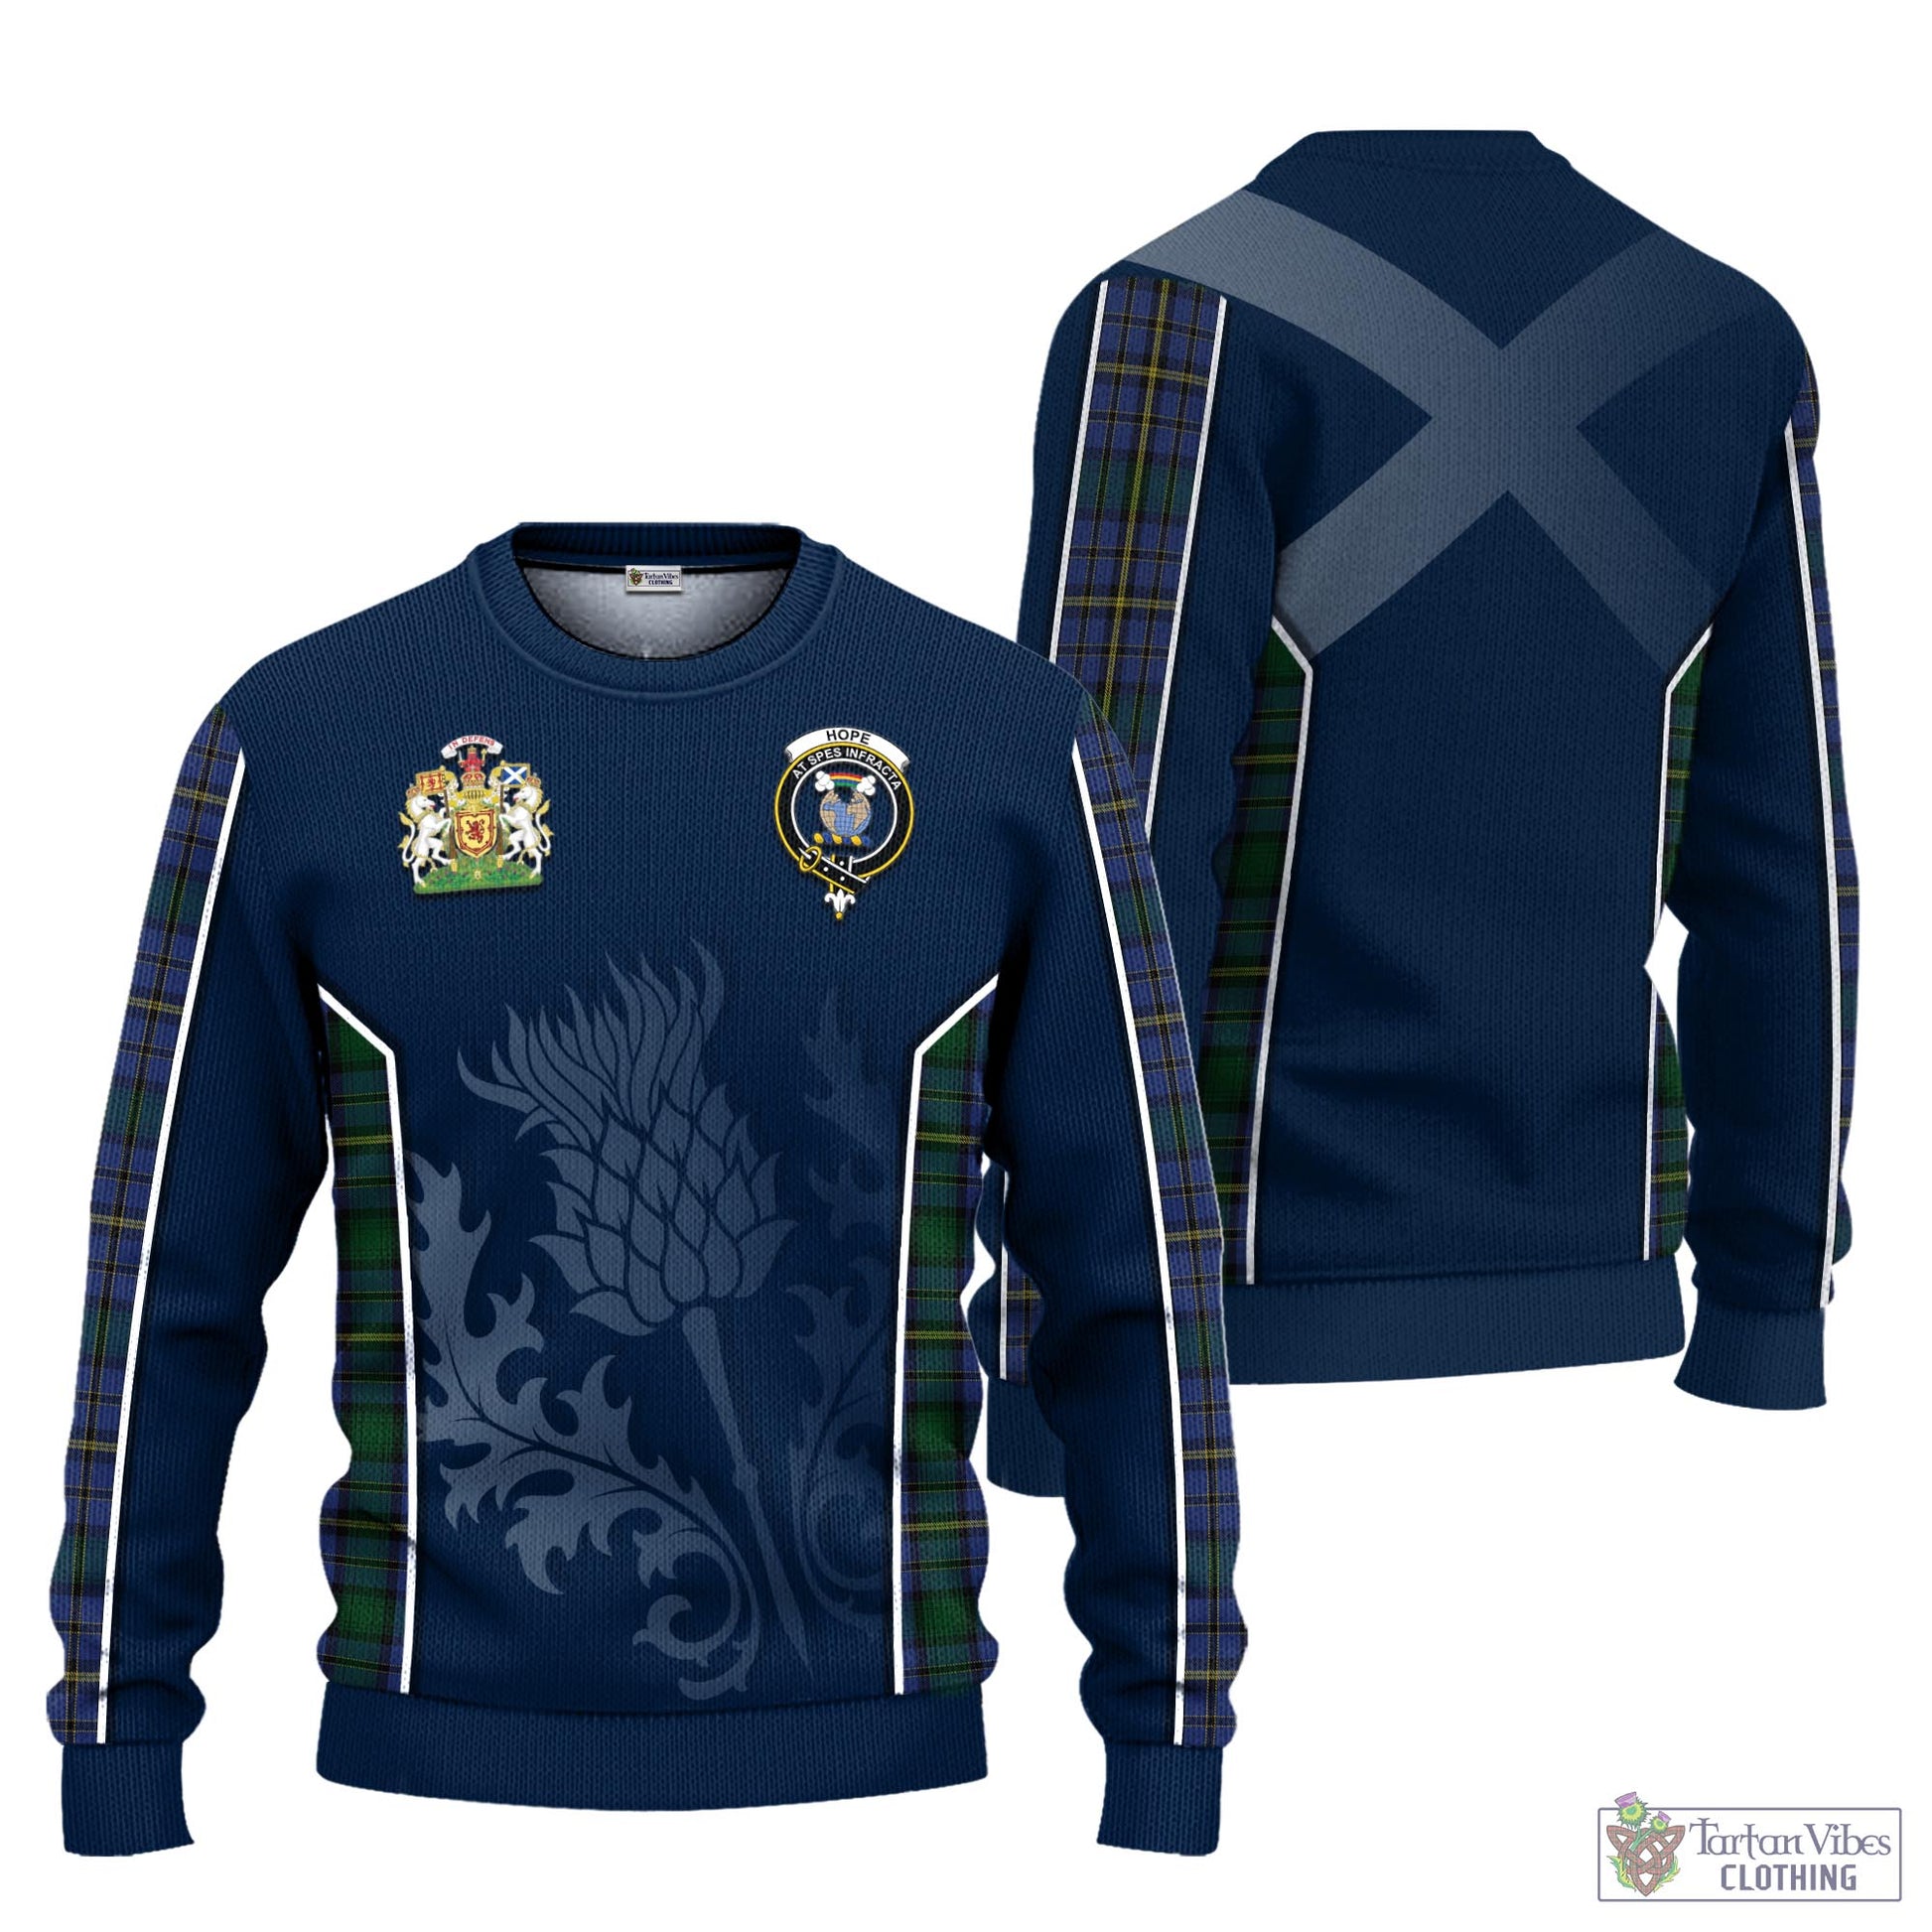 Tartan Vibes Clothing Hope Clan Originaux Tartan Knitted Sweatshirt with Family Crest and Scottish Thistle Vibes Sport Style